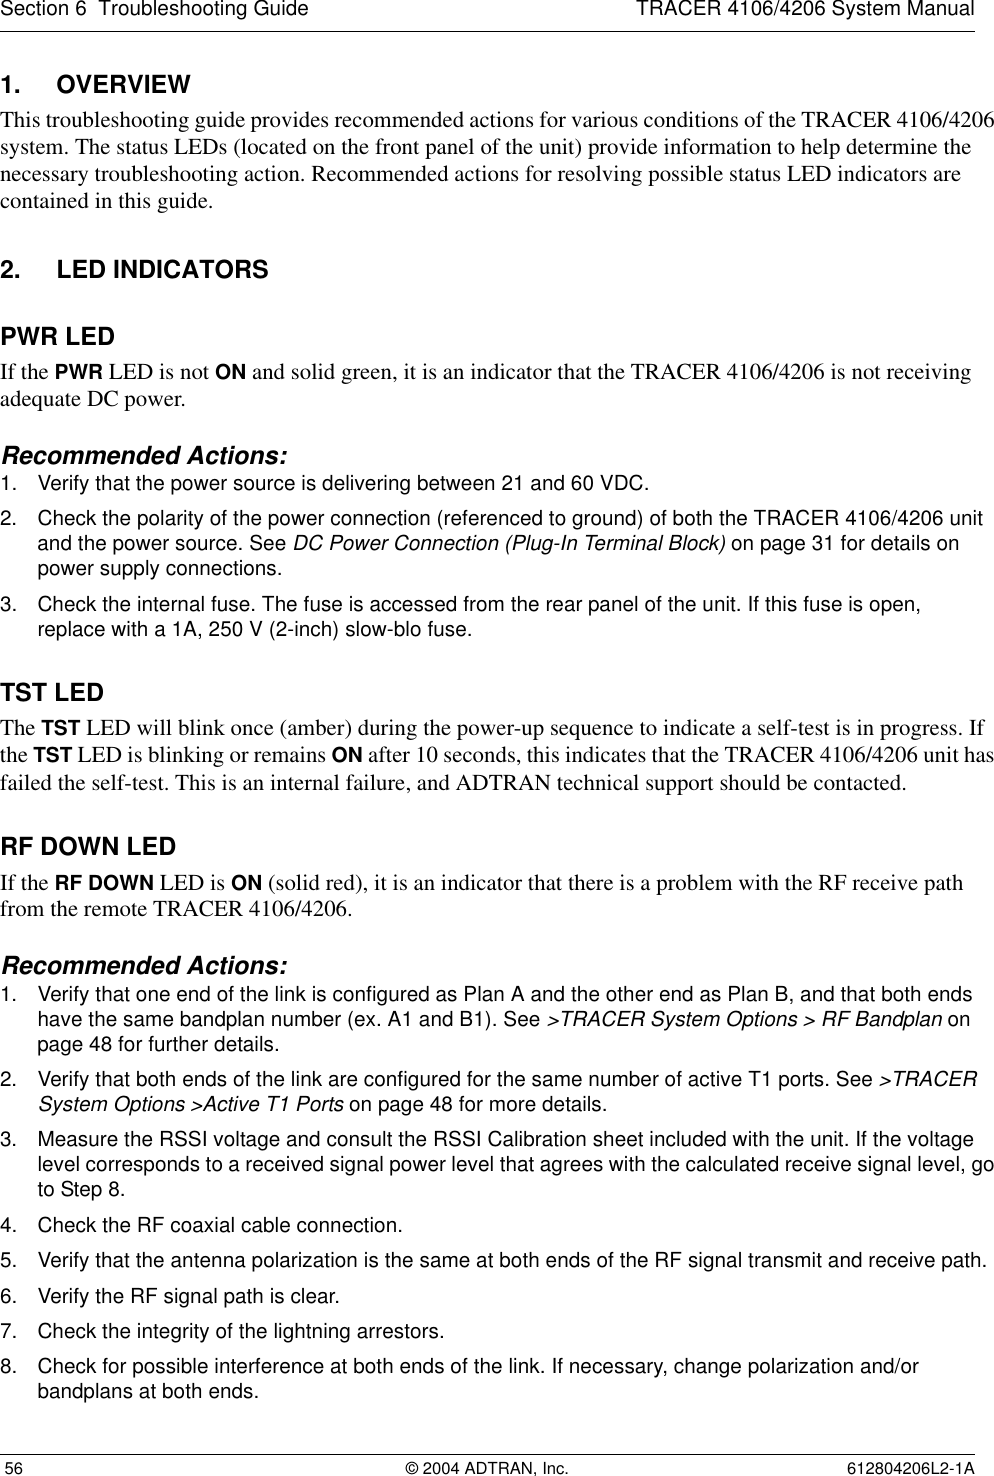 Section 6  Troubleshooting Guide TRACER 4106/4206 System Manual 56 © 2004 ADTRAN, Inc. 612804206L2-1A1. OVERVIEWThis troubleshooting guide provides recommended actions for various conditions of the TRACER 4106/4206 system. The status LEDs (located on the front panel of the unit) provide information to help determine the necessary troubleshooting action. Recommended actions for resolving possible status LED indicators are contained in this guide.2. LED INDICATORSPWR LEDIf the PWR LED is not ON and solid green, it is an indicator that the TRACER 4106/4206 is not receiving adequate DC power. Recommended Actions:1. Verify that the power source is delivering between 21 and 60 VDC.2. Check the polarity of the power connection (referenced to ground) of both the TRACER 4106/4206 unit and the power source. See DC Power Connection (Plug-In Terminal Block) on page 31 for details on power supply connections.3. Check the internal fuse. The fuse is accessed from the rear panel of the unit. If this fuse is open,replace with a 1A, 250 V (2-inch) slow-blo fuse.TST LEDThe TST LED will blink once (amber) during the power-up sequence to indicate a self-test is in progress. If the TST LED is blinking or remains ON after 10 seconds, this indicates that the TRACER 4106/4206 unit has failed the self-test. This is an internal failure, and ADTRAN technical support should be contacted.RF DOWN LEDIf the RF DOWN LED is ON (solid red), it is an indicator that there is a problem with the RF receive path from the remote TRACER 4106/4206.Recommended Actions:1. Verify that one end of the link is configured as Plan A and the other end as Plan B, and that both ends have the same bandplan number (ex. A1 and B1). See &gt;TRACER System Options &gt; RF Bandplan on page 48 for further details.2. Verify that both ends of the link are configured for the same number of active T1 ports. See &gt;TRACER System Options &gt;Active T1 Ports on page 48 for more details.3. Measure the RSSI voltage and consult the RSSI Calibration sheet included with the unit. If the voltage level corresponds to a received signal power level that agrees with the calculated receive signal level, go to Step 8.4. Check the RF coaxial cable connection.5. Verify that the antenna polarization is the same at both ends of the RF signal transmit and receive path.6. Verify the RF signal path is clear.7. Check the integrity of the lightning arrestors.8. Check for possible interference at both ends of the link. If necessary, change polarization and/or bandplans at both ends.